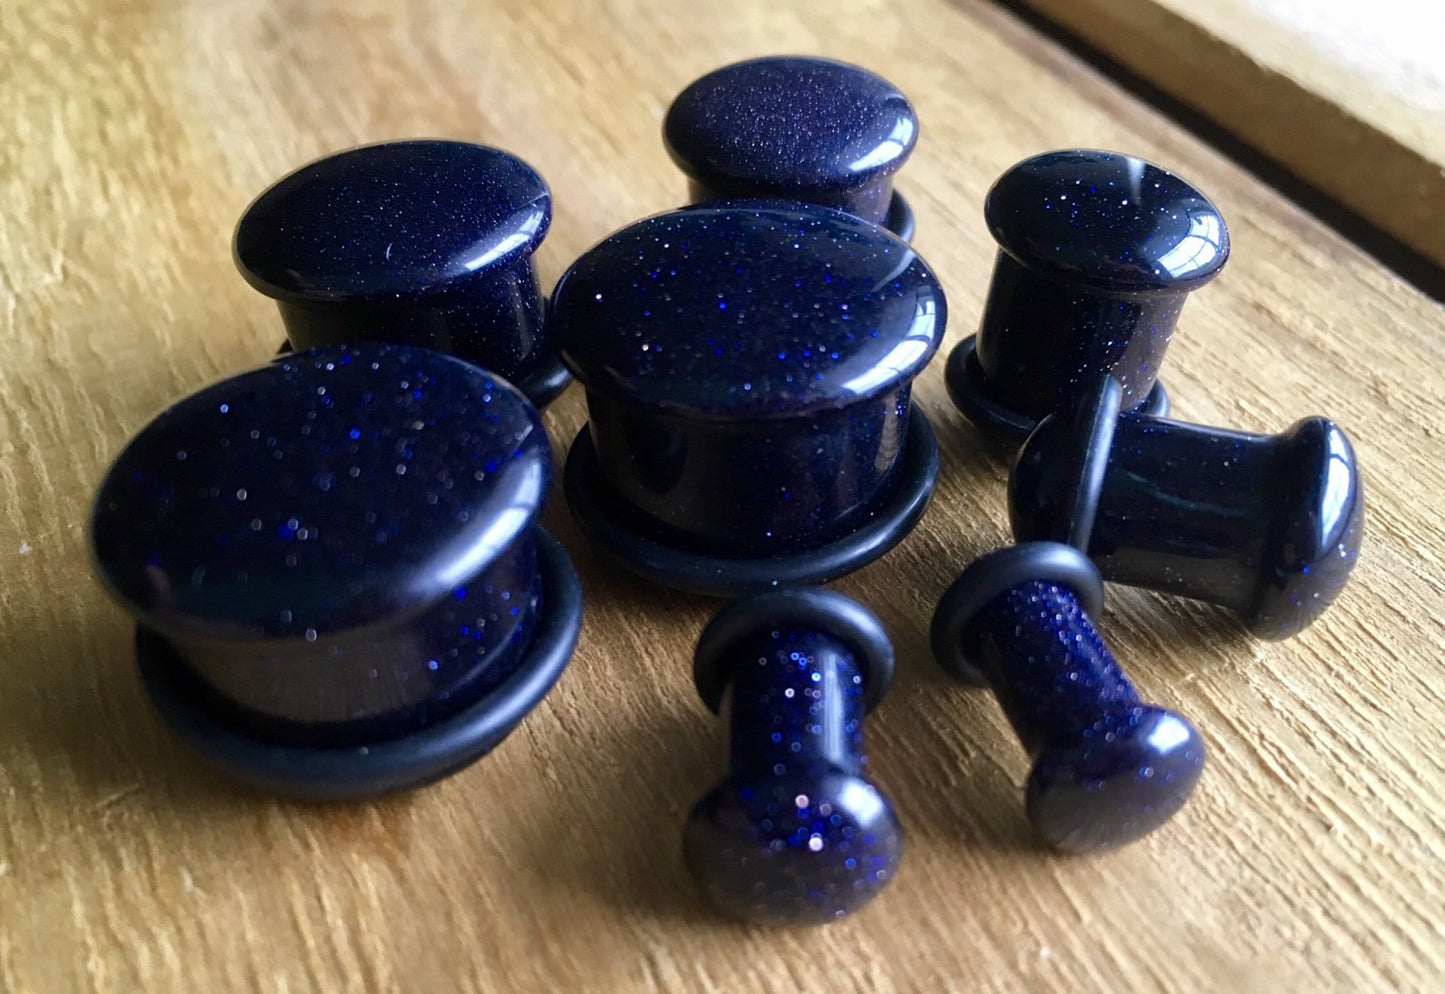 PAIR of Stunning Midnight Blue Sandstone Single Flare Stone Plugs with O-Rings - Gauges 4g (5mm) up to 5/8" (16mm) available!